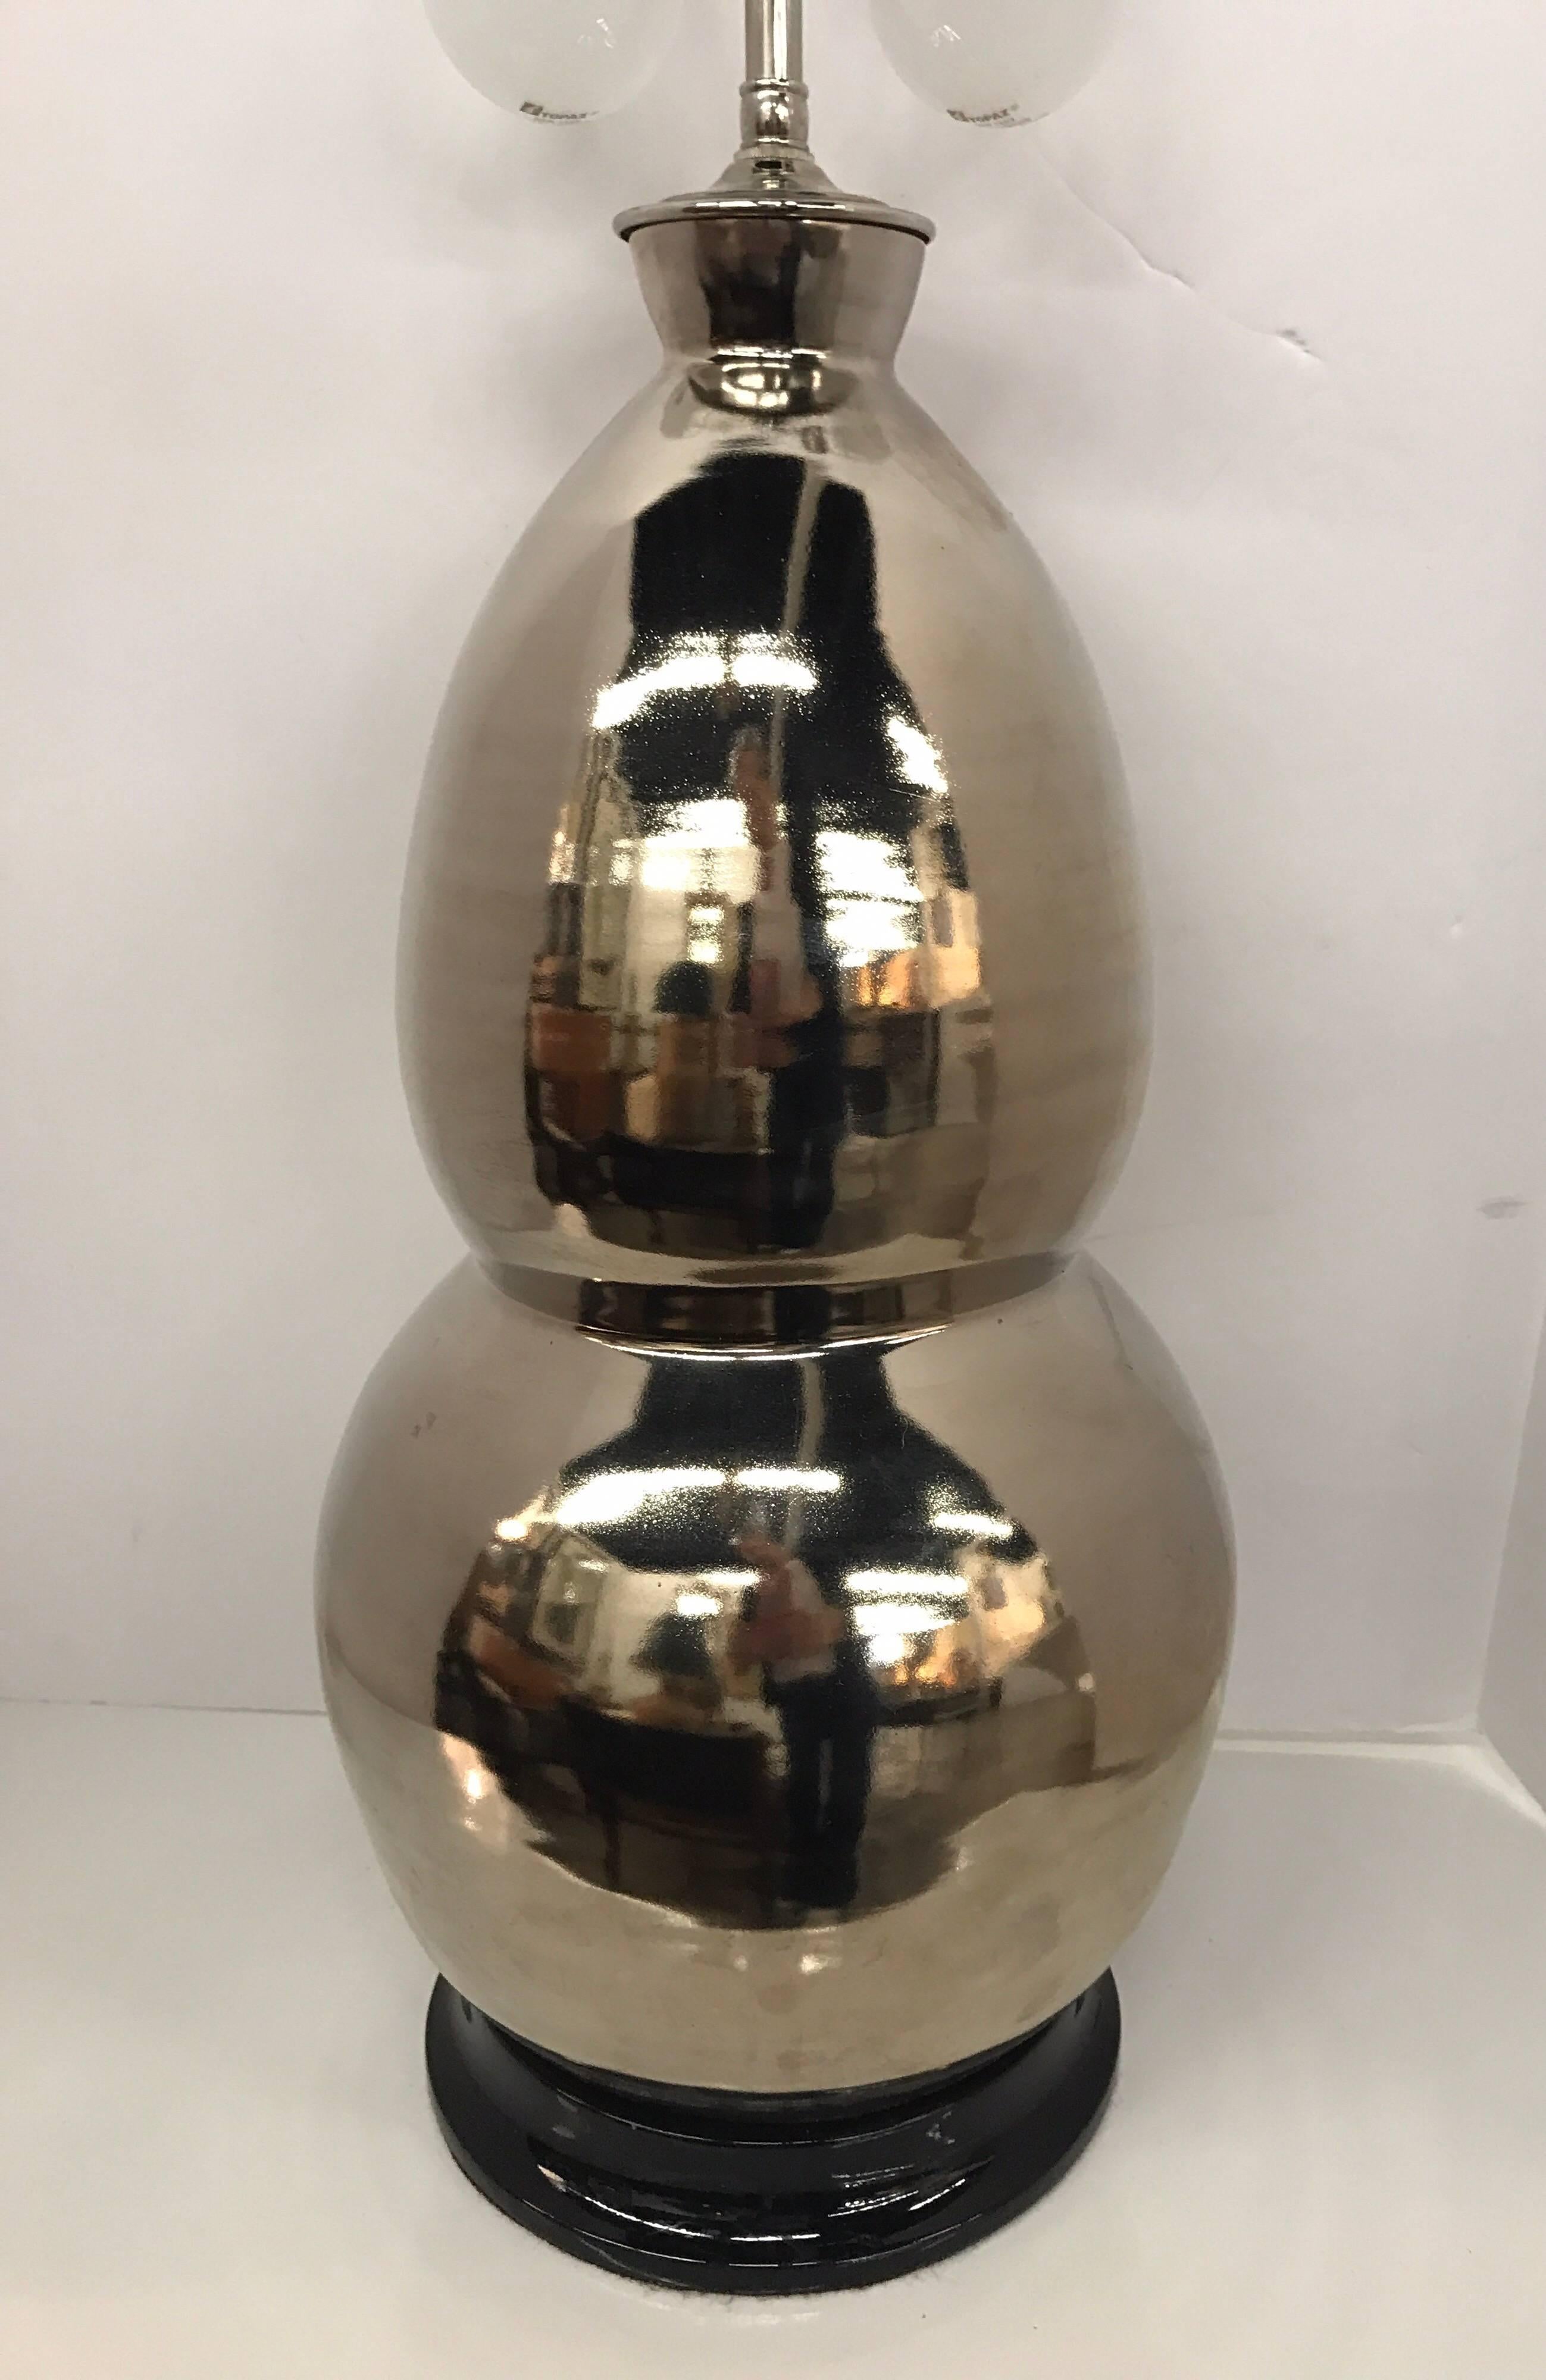 Magnificent Christopher Spitzmiller modern double gourd table lamp.
Signed on the bottom and ohh so coveted! Wired for US and in perfect working order.
Comes without shade.